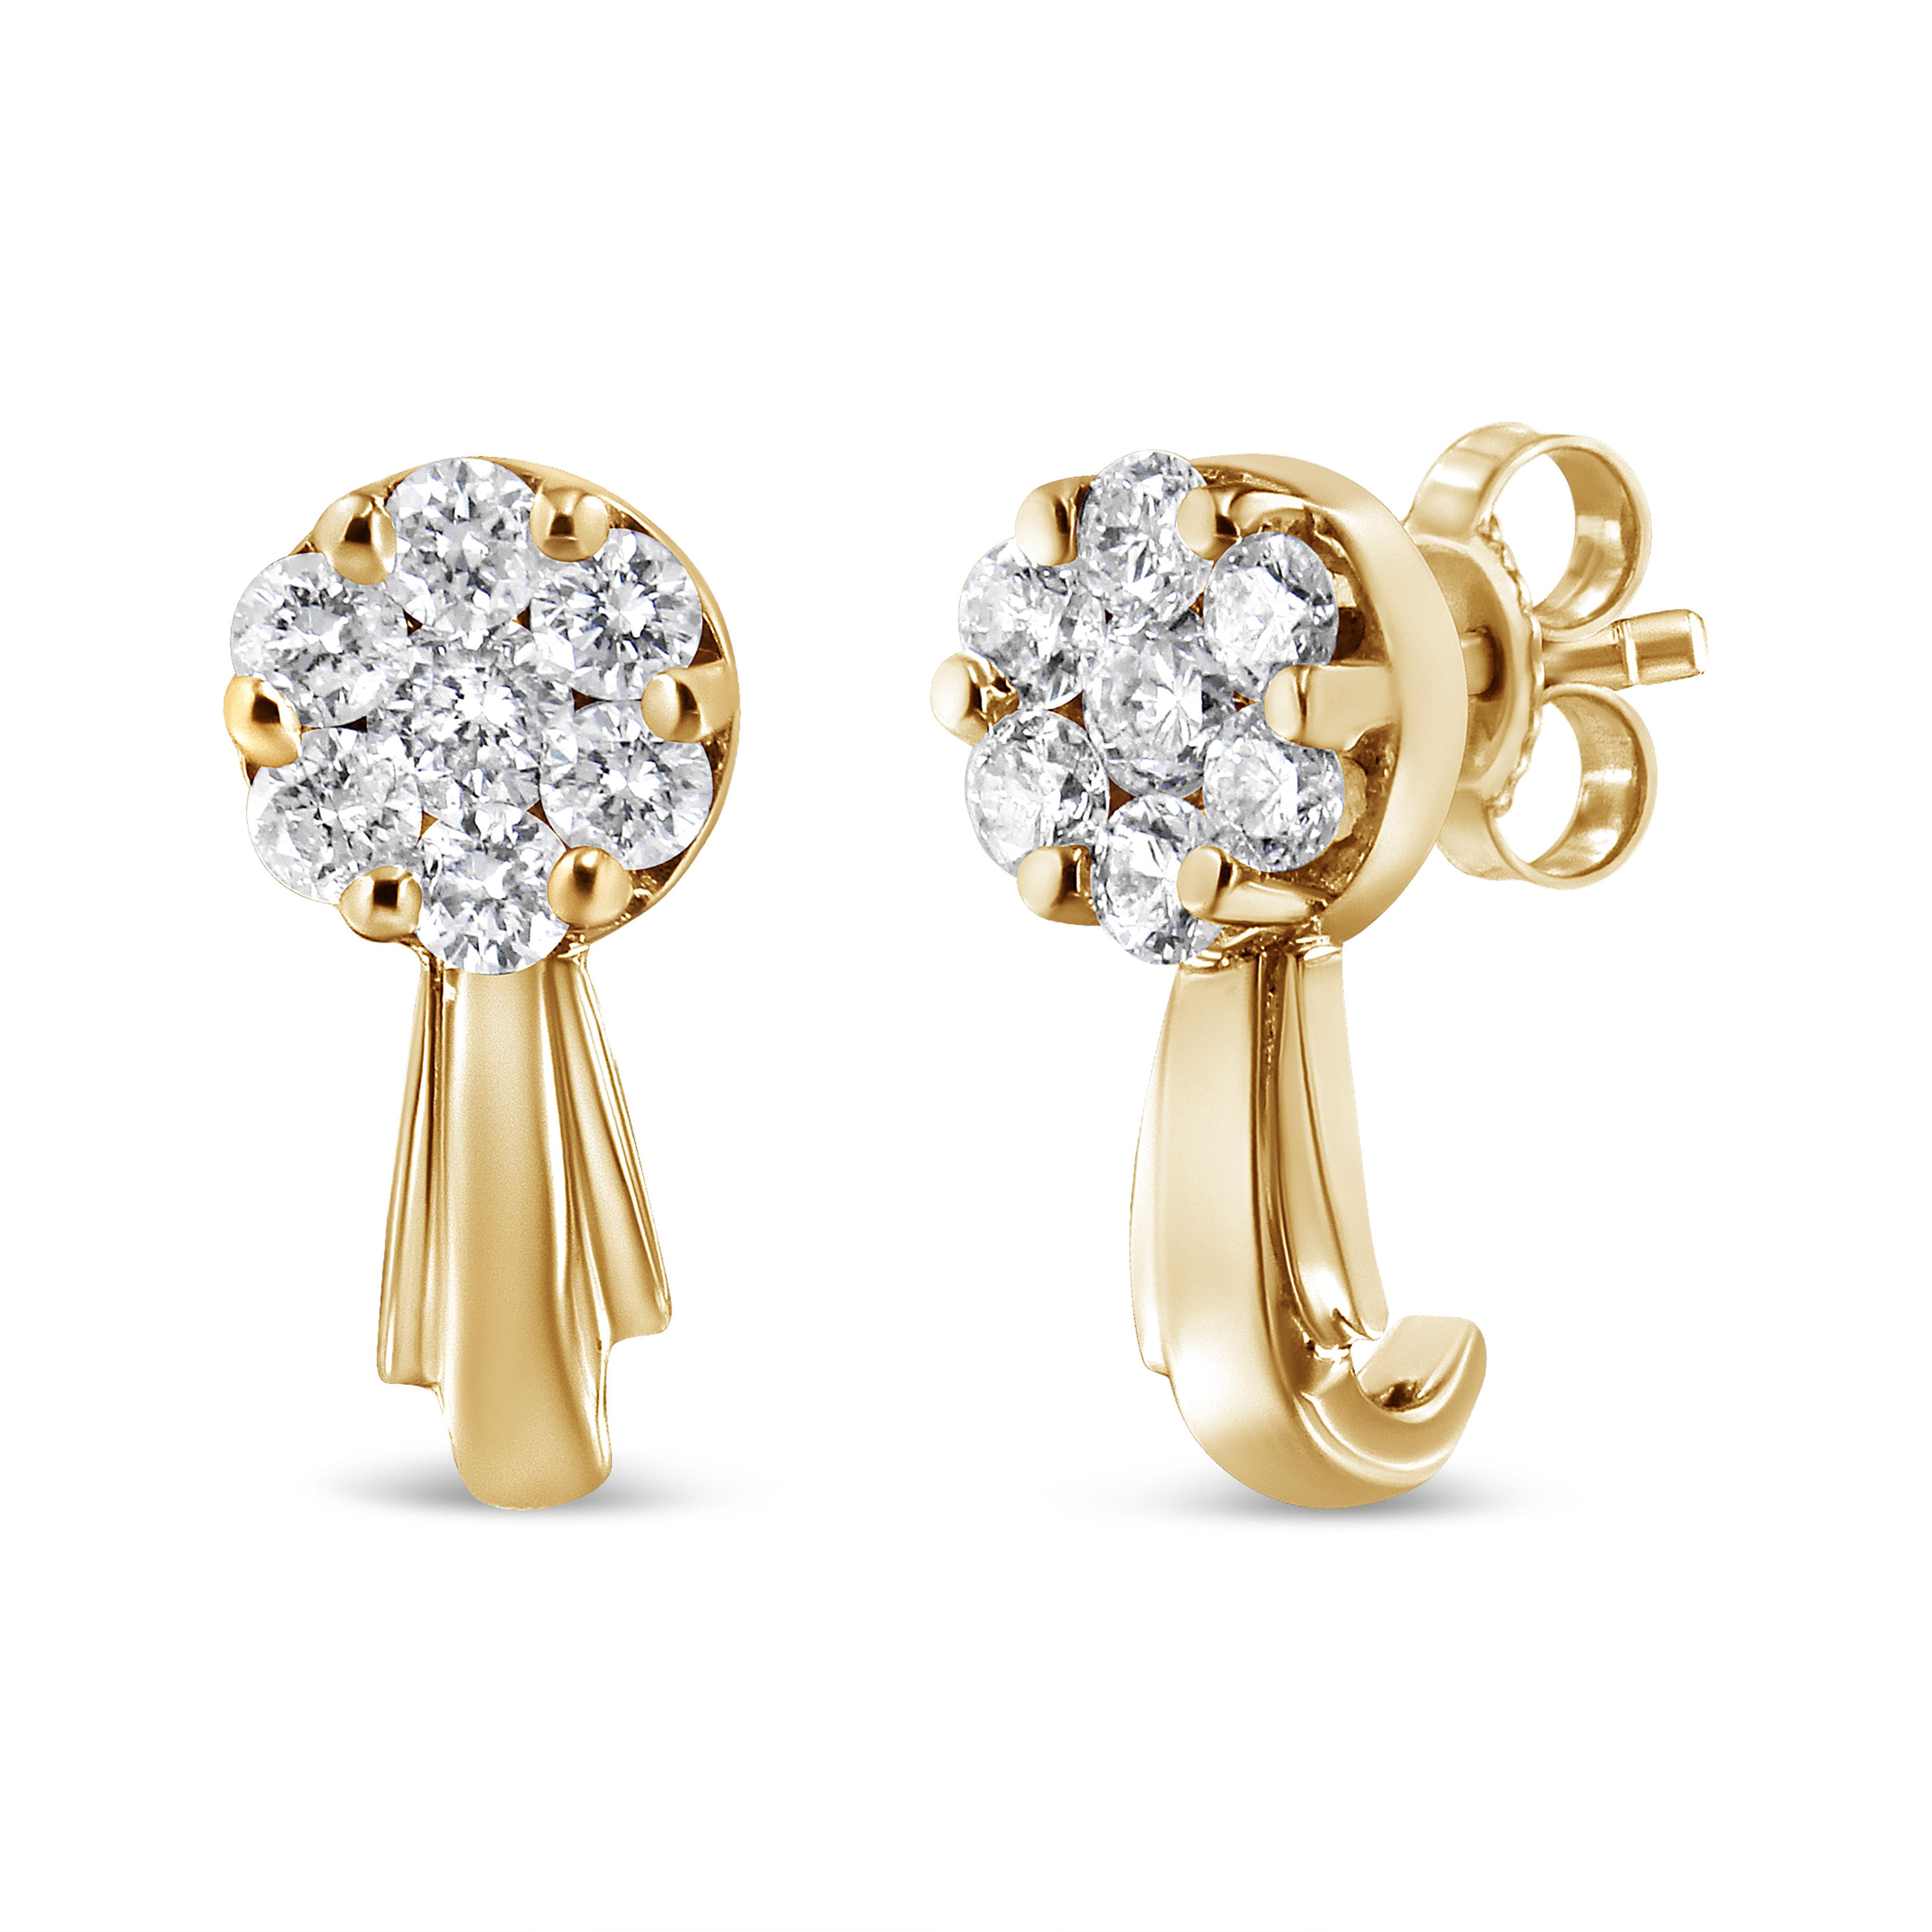 Adorn yourself with these petite and elegant 14k yellow gold floral drop and dangle earrings. These divine earrings are embellished with natural, round-cut diamonds in a central floral cluster. The gold earring back extends downwards to create a